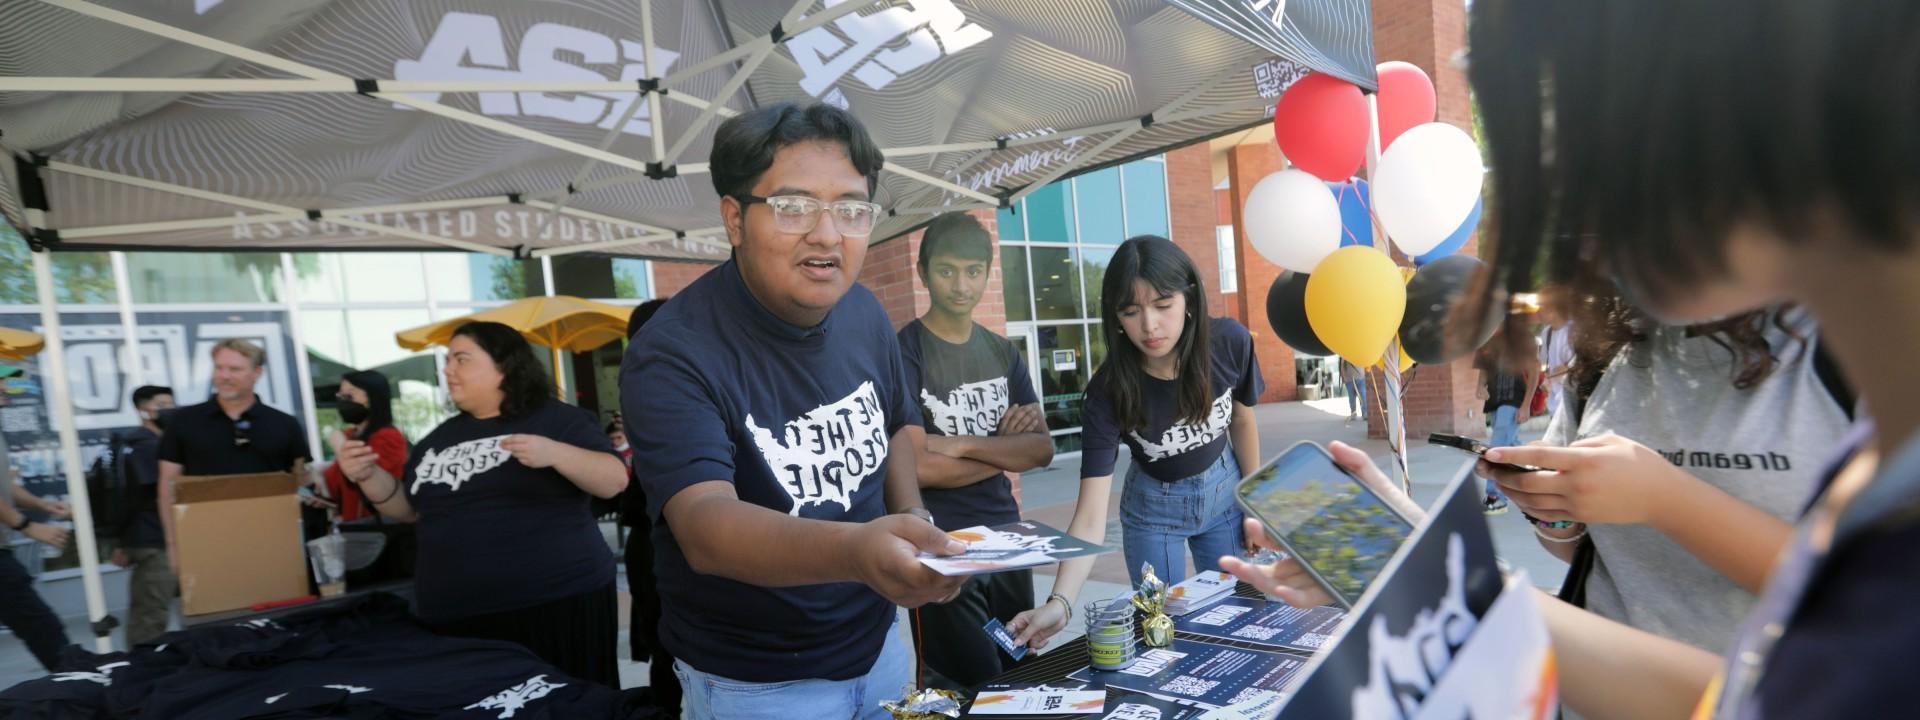 A student wearing a "We the People" t-shirt and standing under an Associated Students Inc., canopy hands students a brochure.